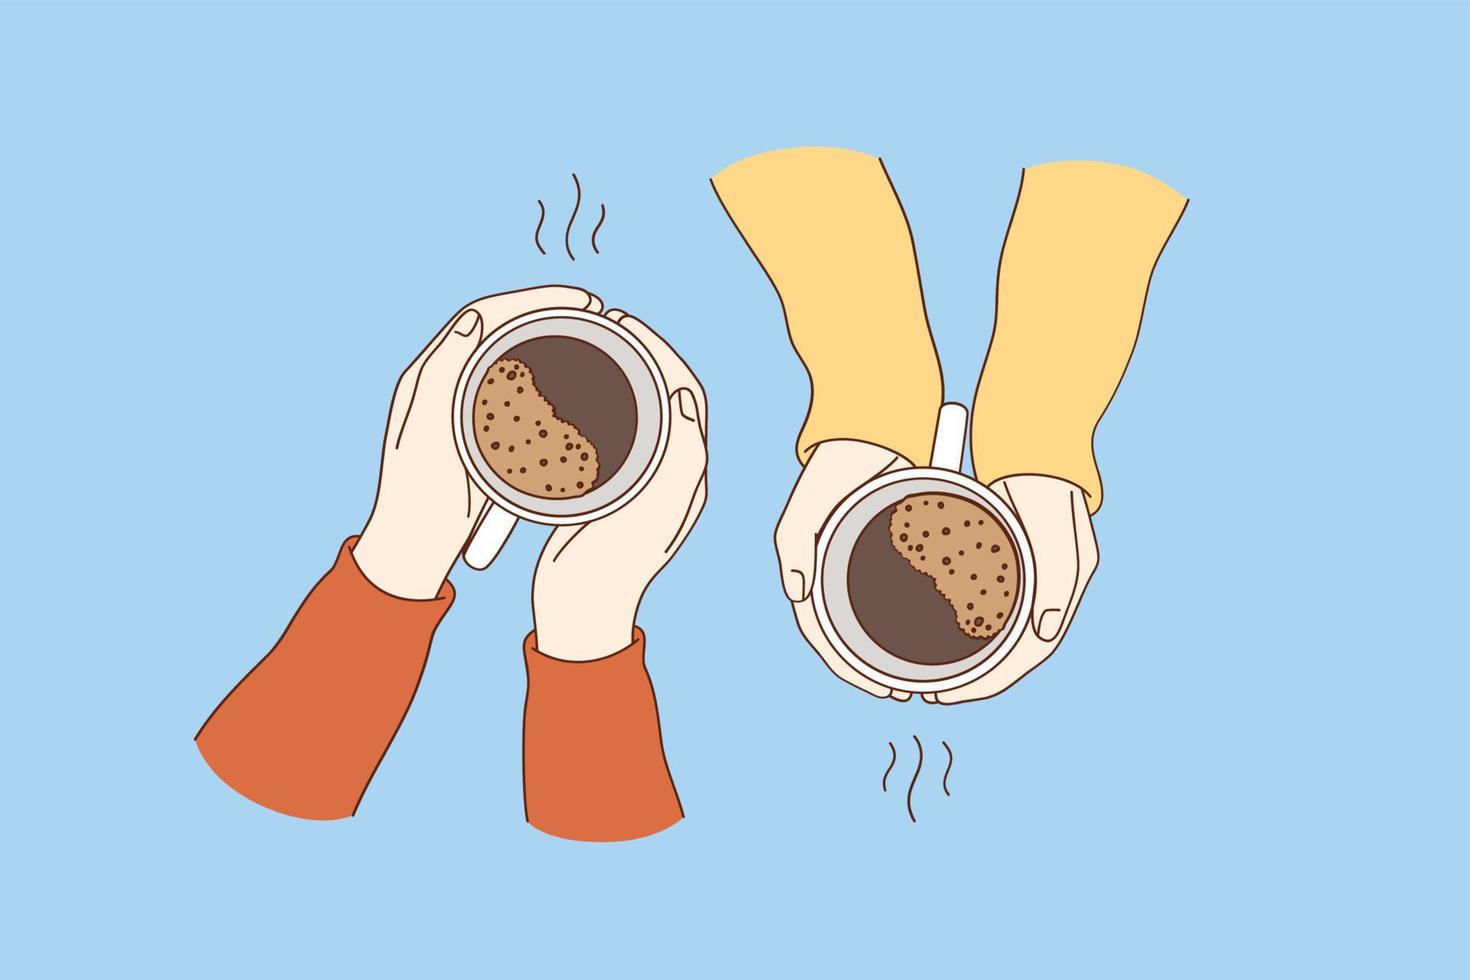 Hot drinks for breakfast concept. Female hands holding cups of fresh brewed coffee drinks over blue table background vector illustration, top view